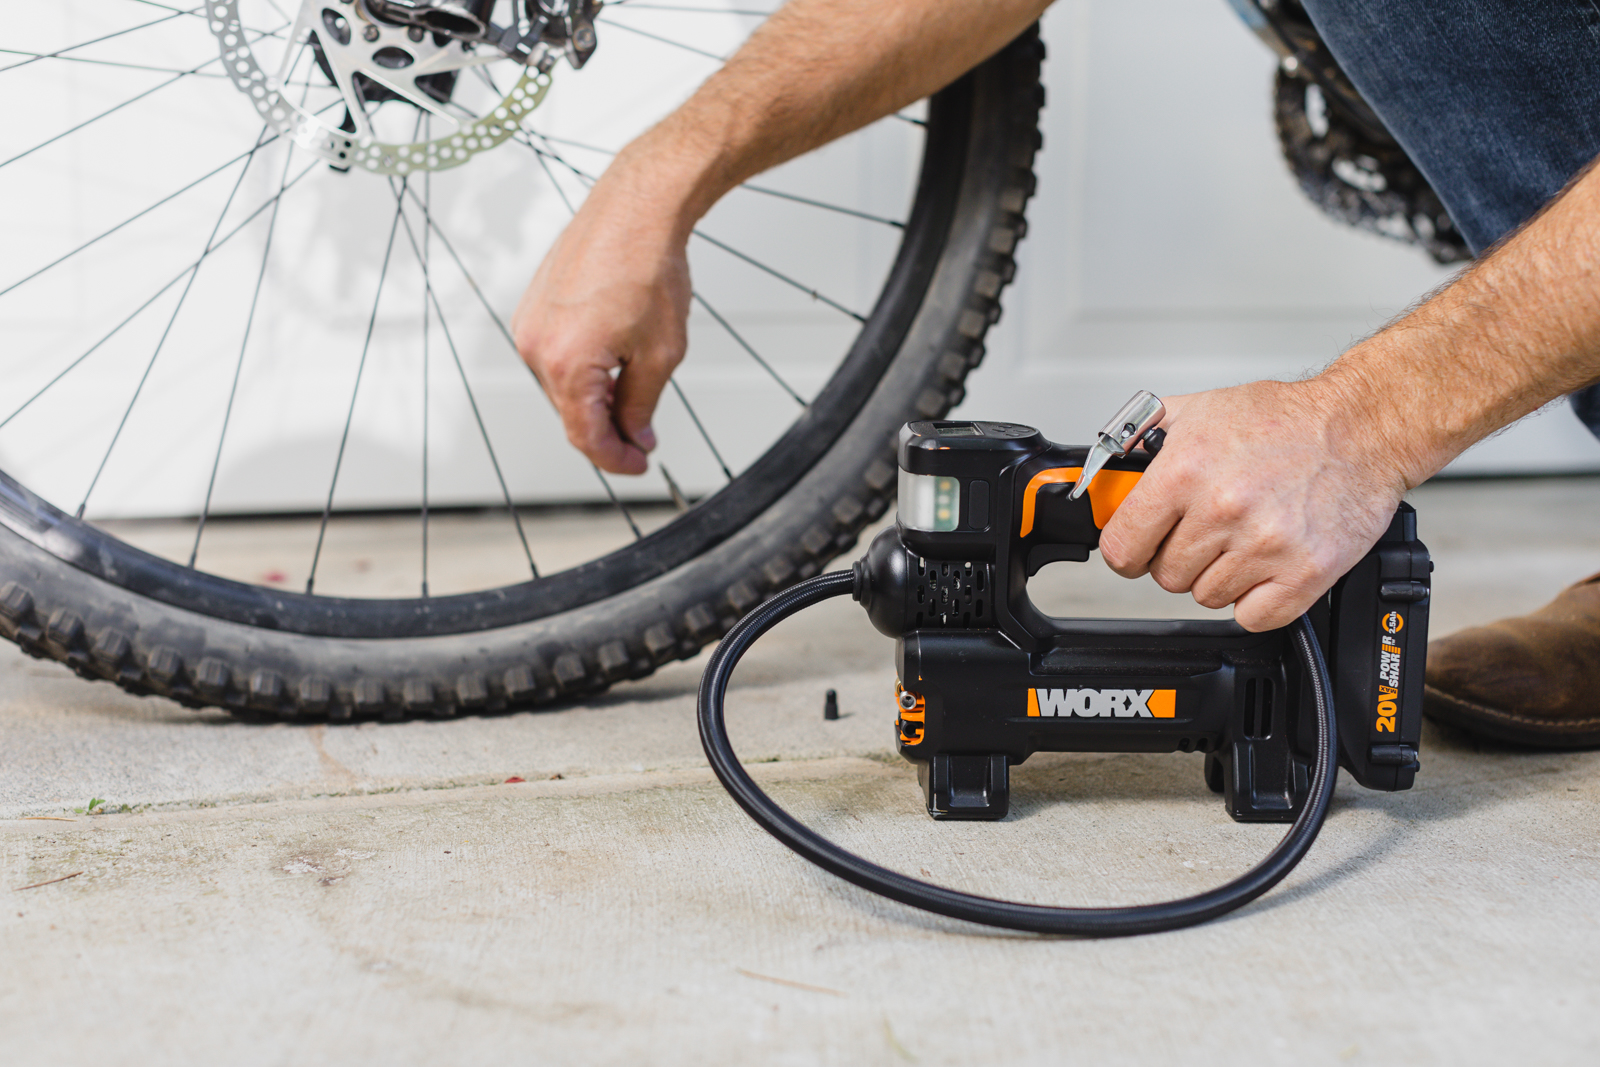 WORX 20V Portable Inflator delivers up to 150 psi air pressure to keep bikes and other household inflatables ready to use.